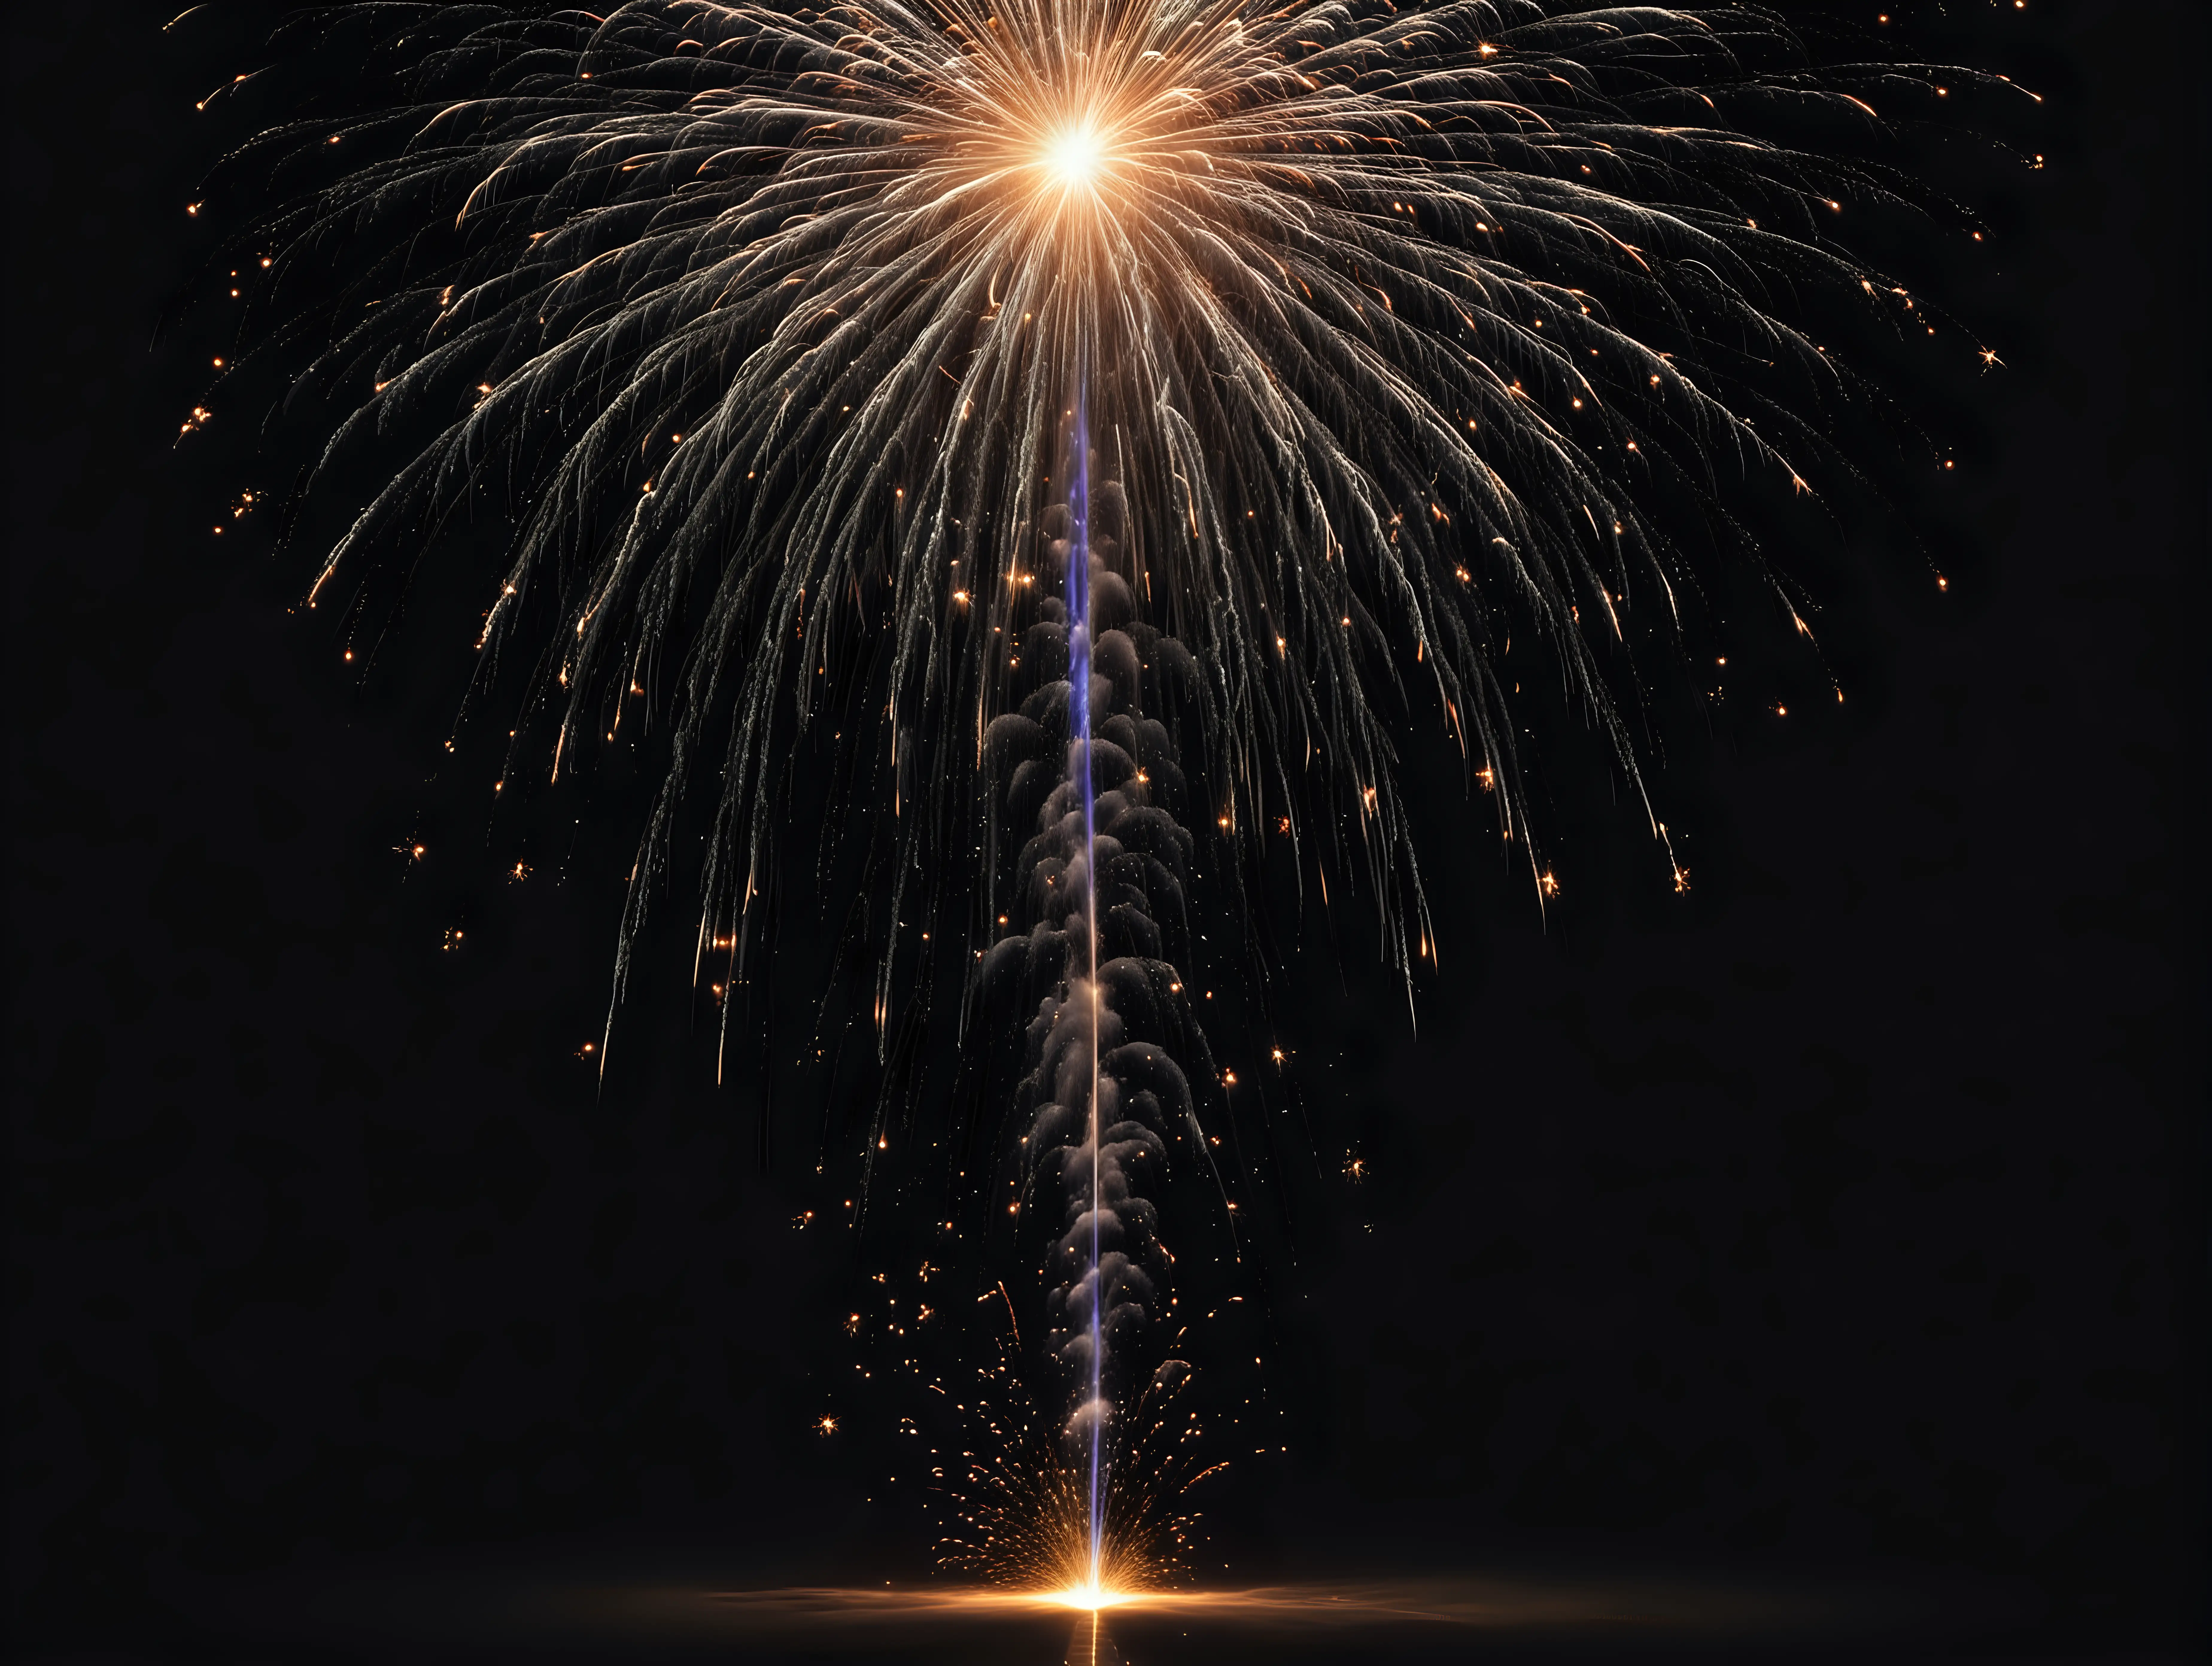 long falling, one cascading firework falling with pure black background.  keep all fireworks completely within the photo.  